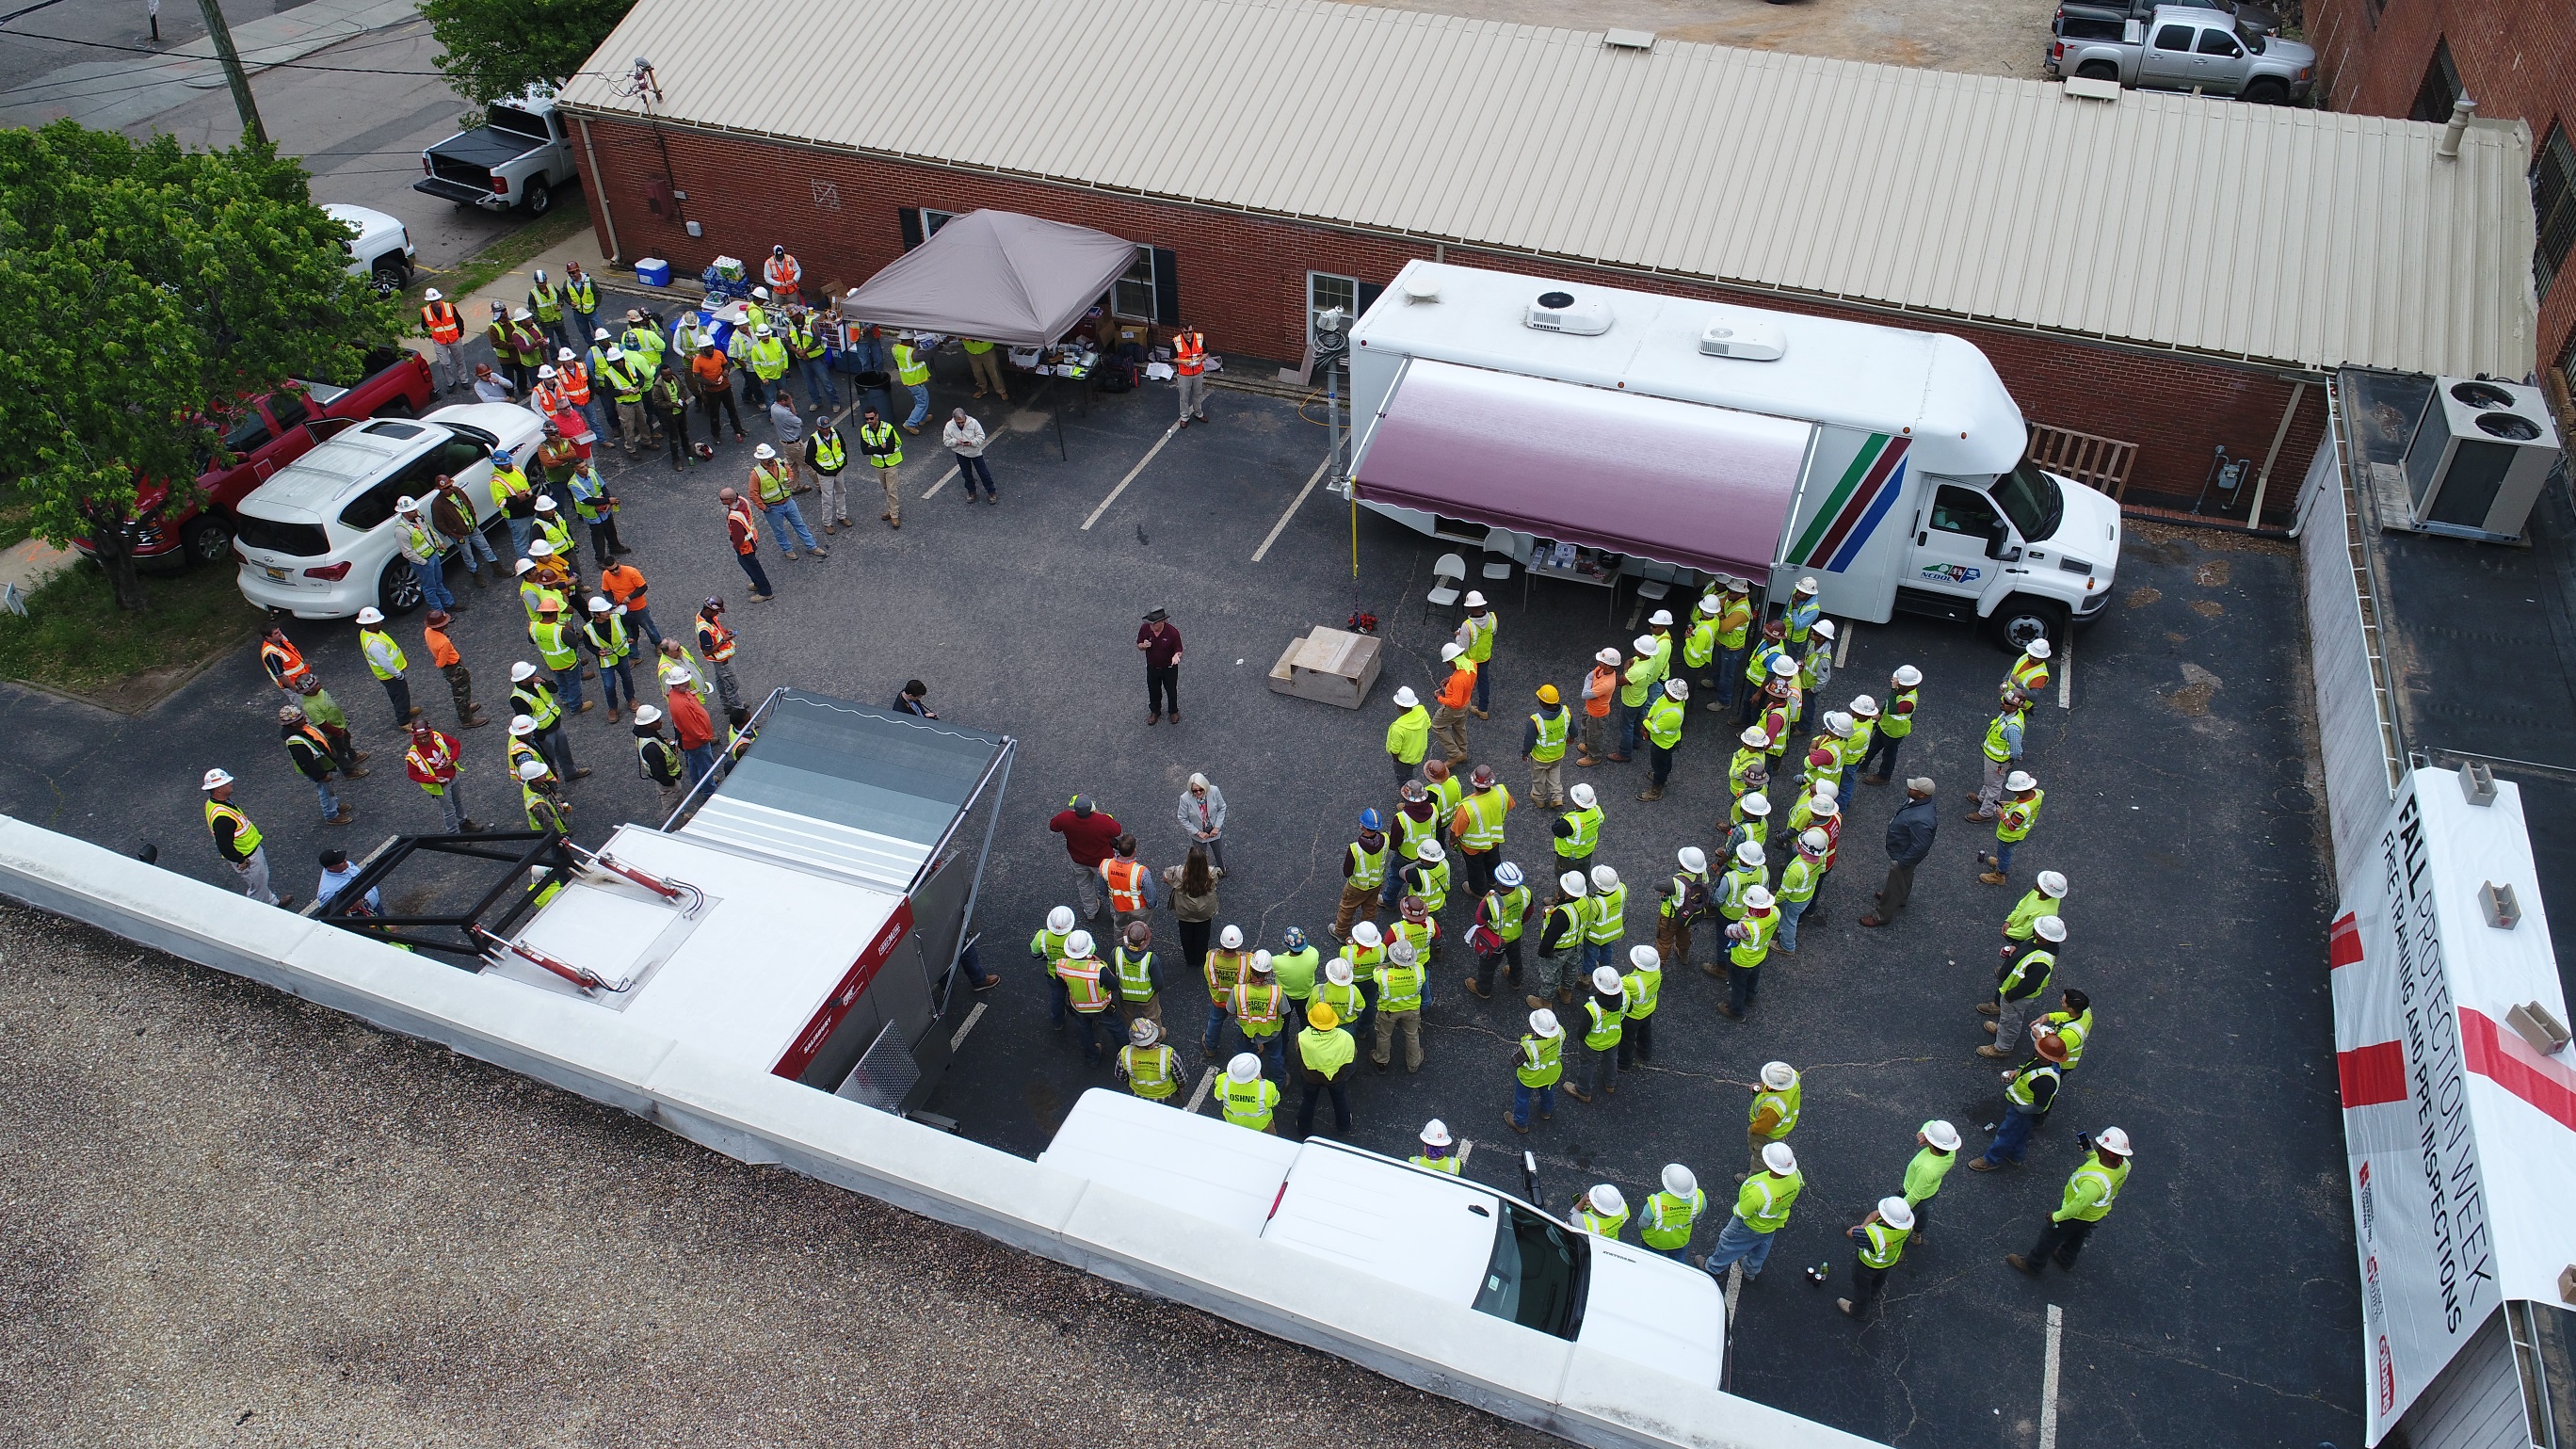 Drone view of ongoing safety demonstrations.